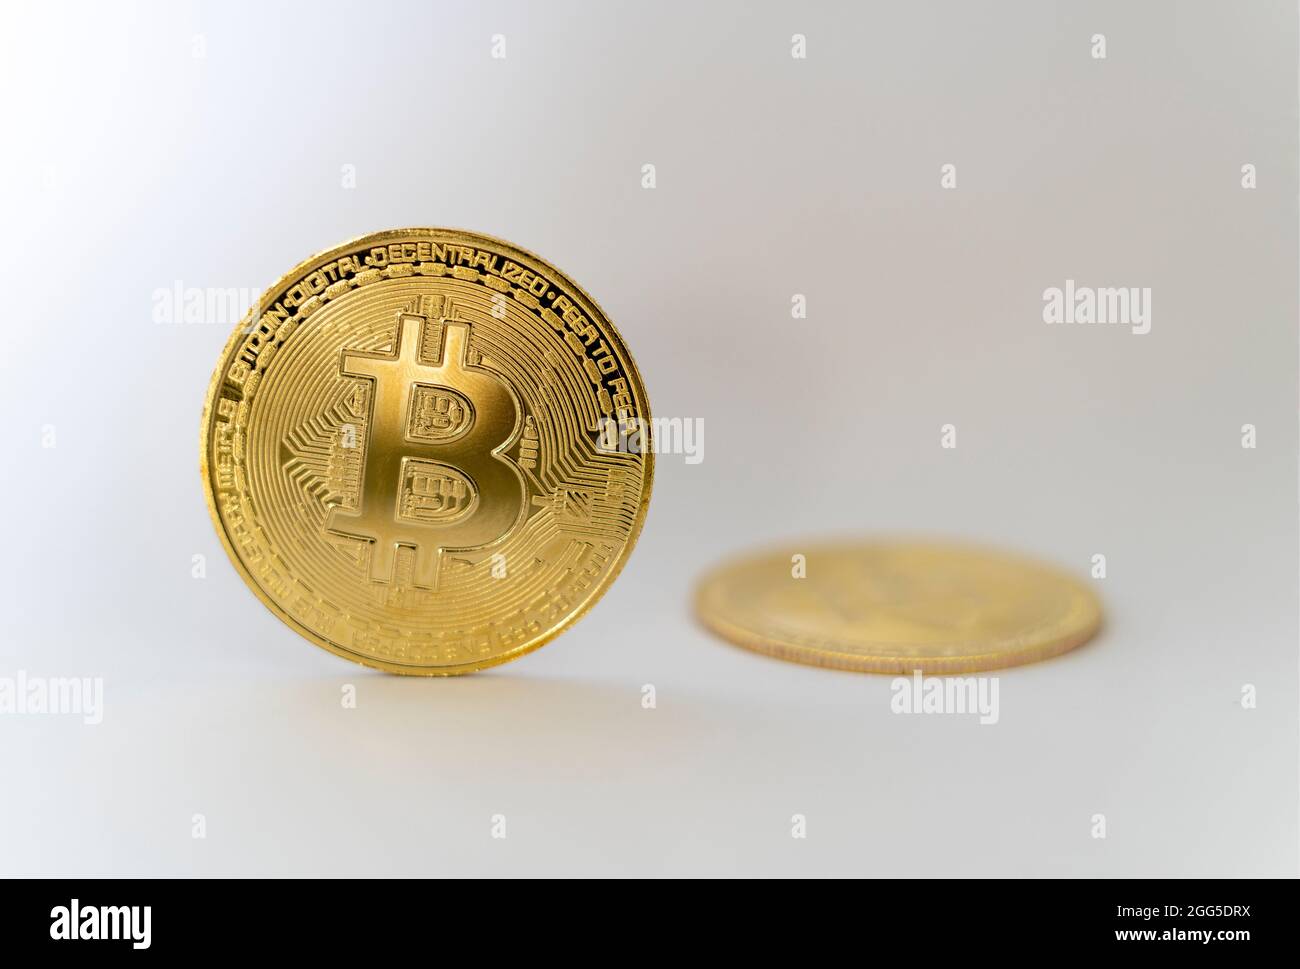 Bitcoin crypto currency holding. Gold coin with BTC symbol. Blockchain technology. Bitcoin Increase in price or crash. Investing in virtual assets. Stock Photo